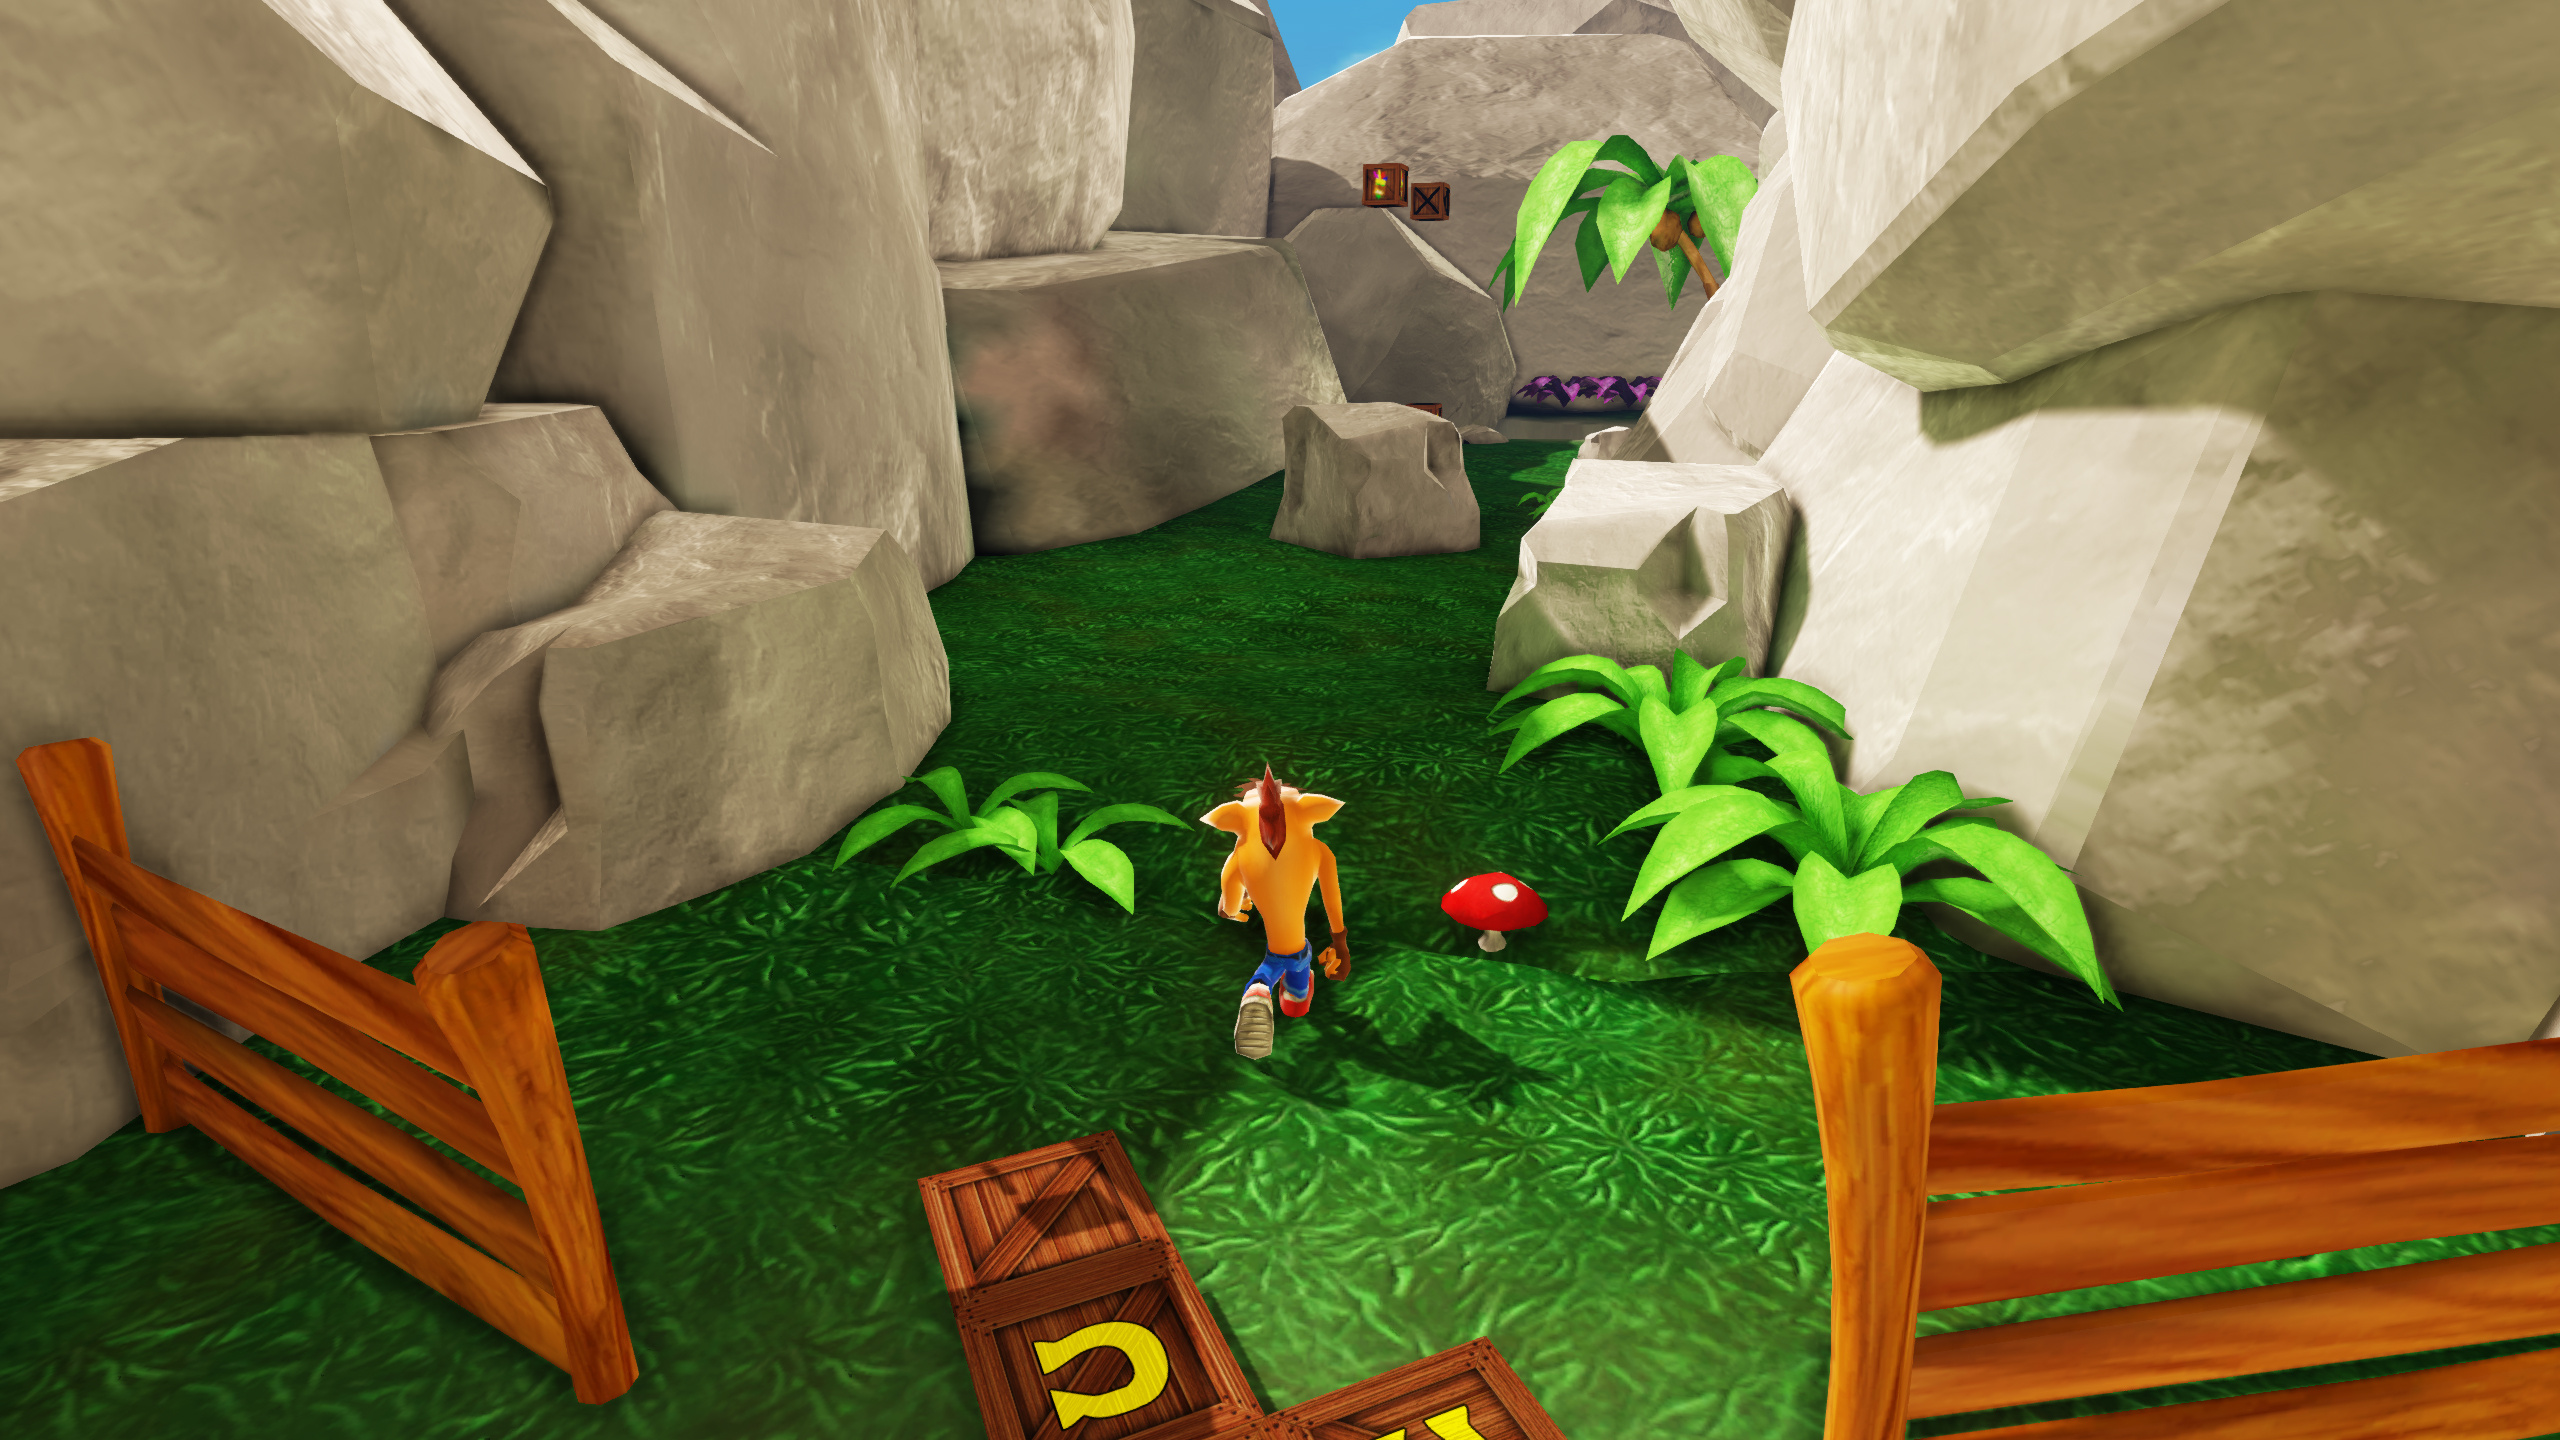 http://images.pushsquare.com/news/2014/01/activision_wont_make_a_crash_bandicoot_game_so_this_fan_one_will_have_to_do/attachment/0/original.jpg